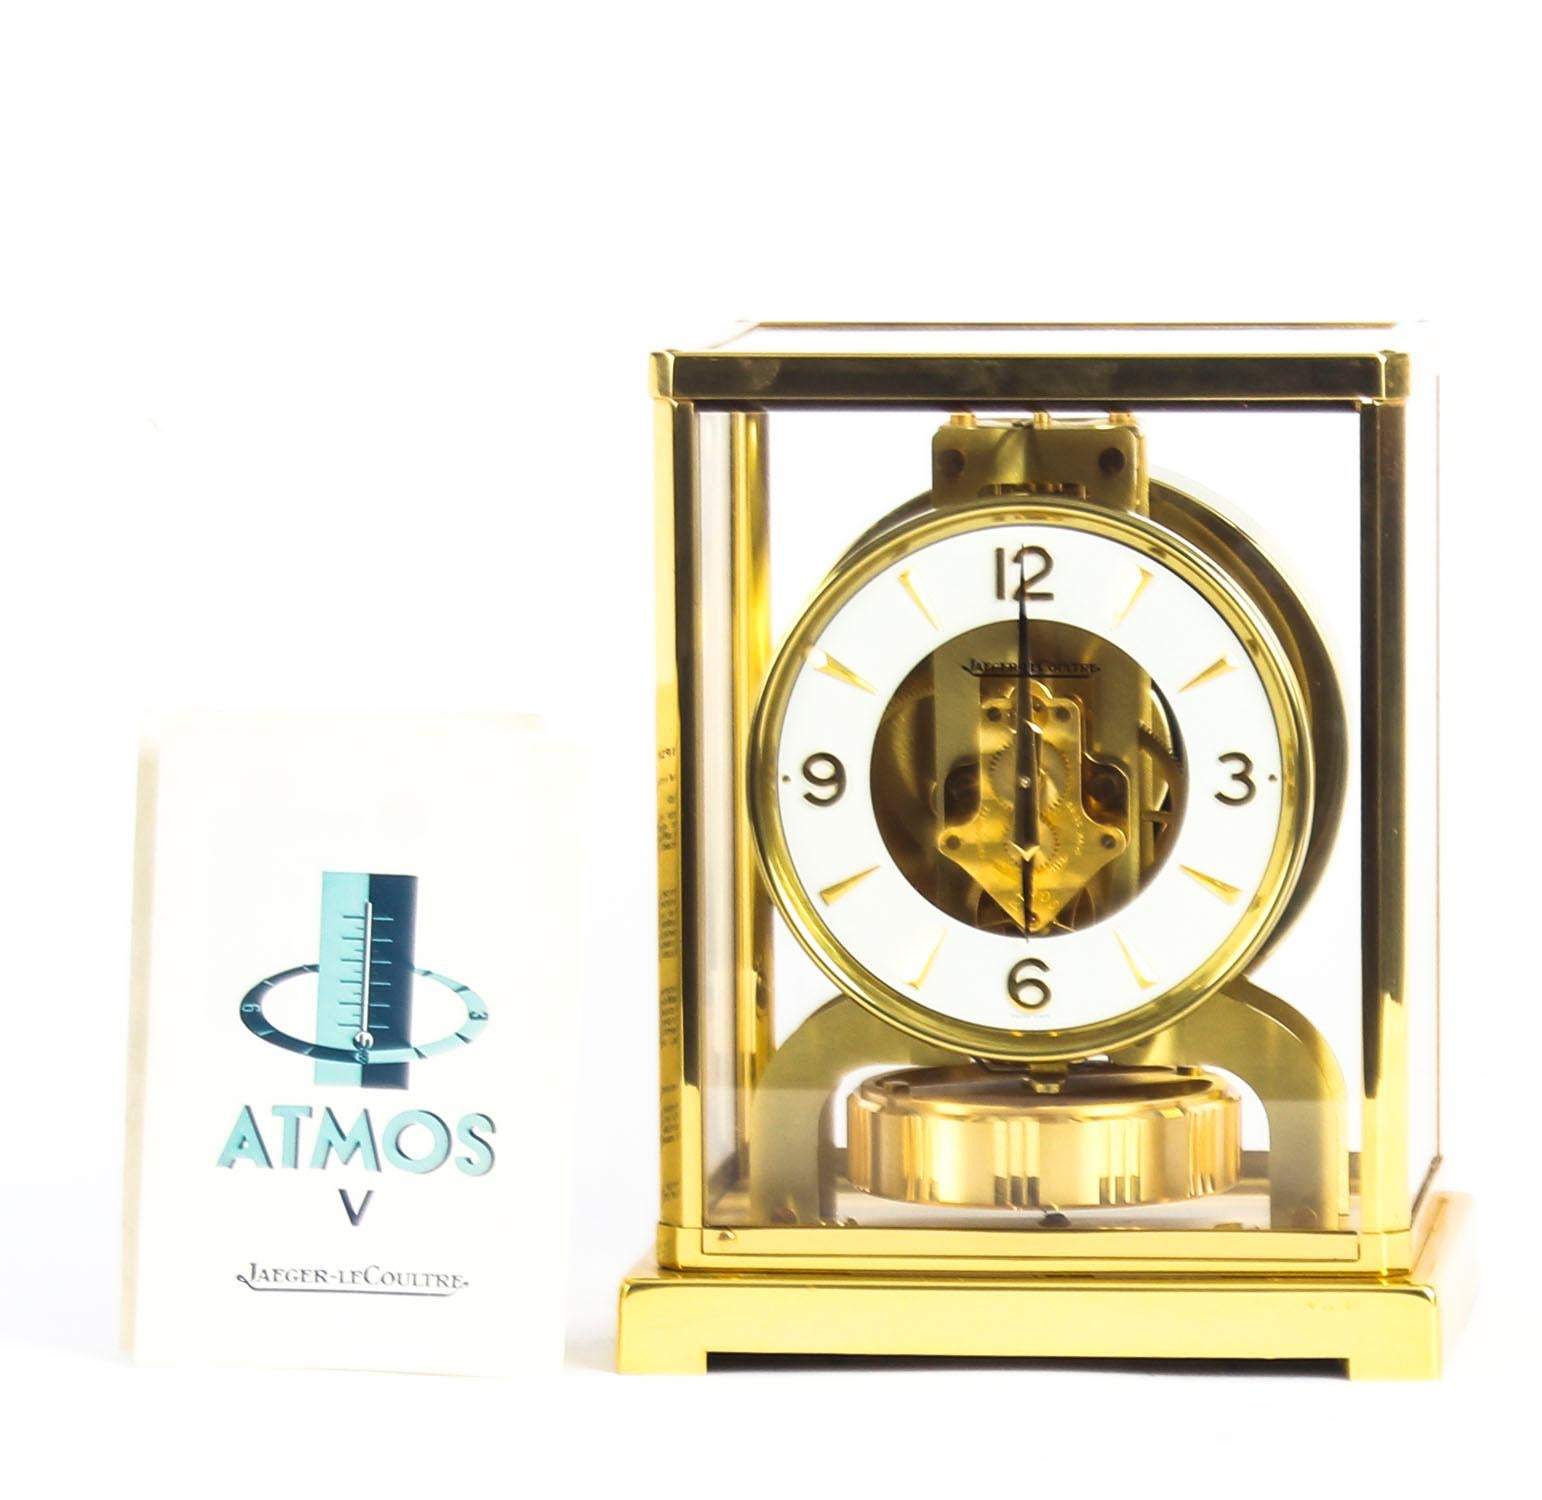 This is a very elegant Vintage Atmos perpetual mantle clock by Jaeger-LeCoultre, bearing their ref No. 251800, with original operating booklet and original packaging, circa 1970 in date.

The clock is displayed in a polished gilt rectangular brass